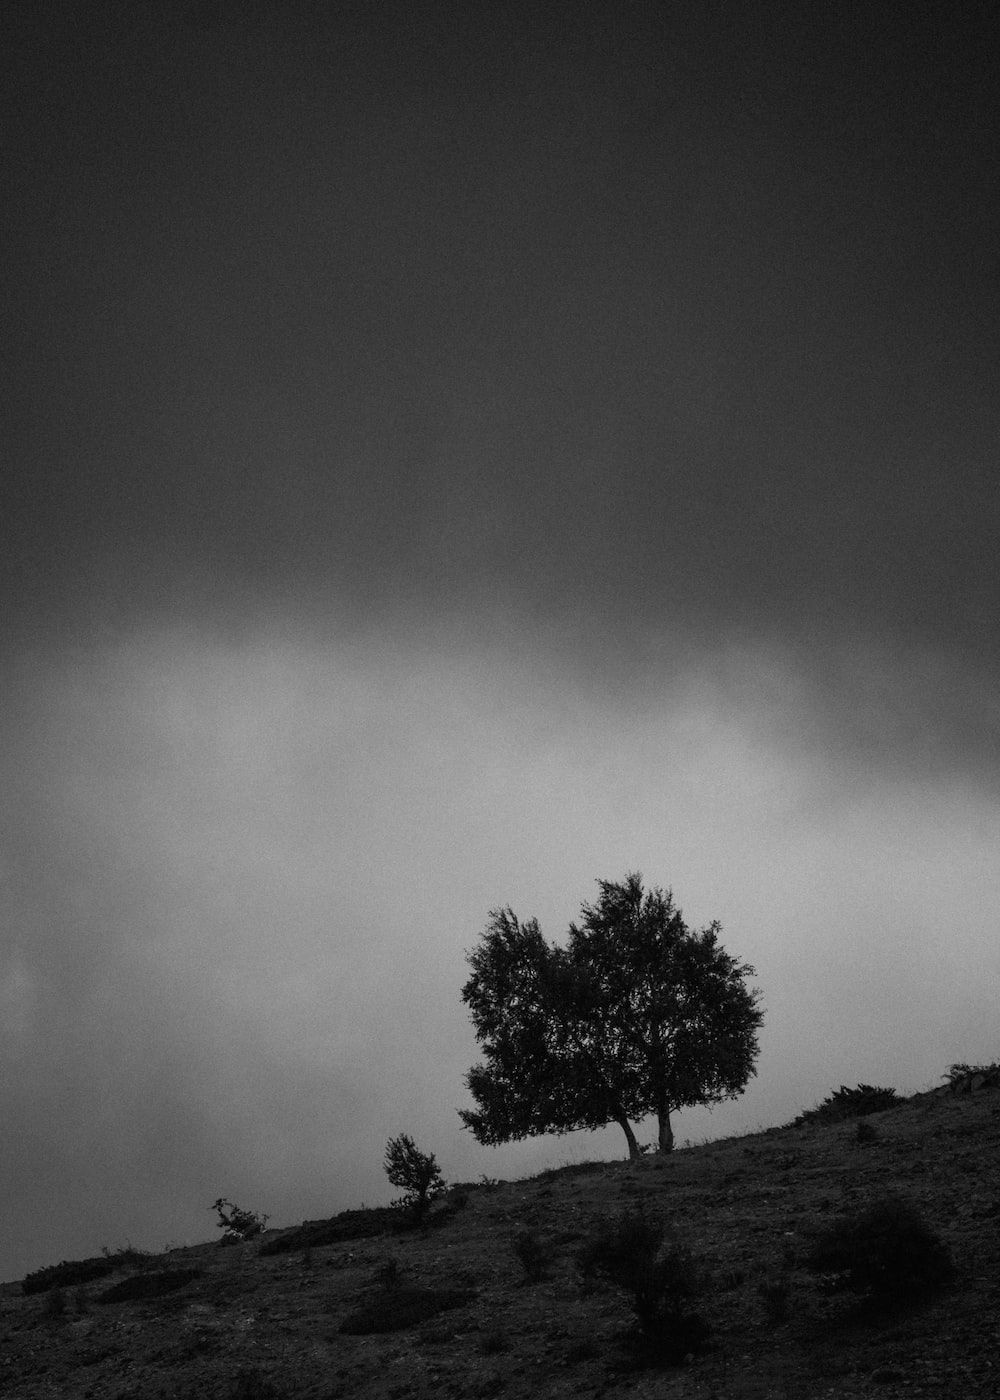 A black and white photo of a tree on a hillside. - Sad, depressing